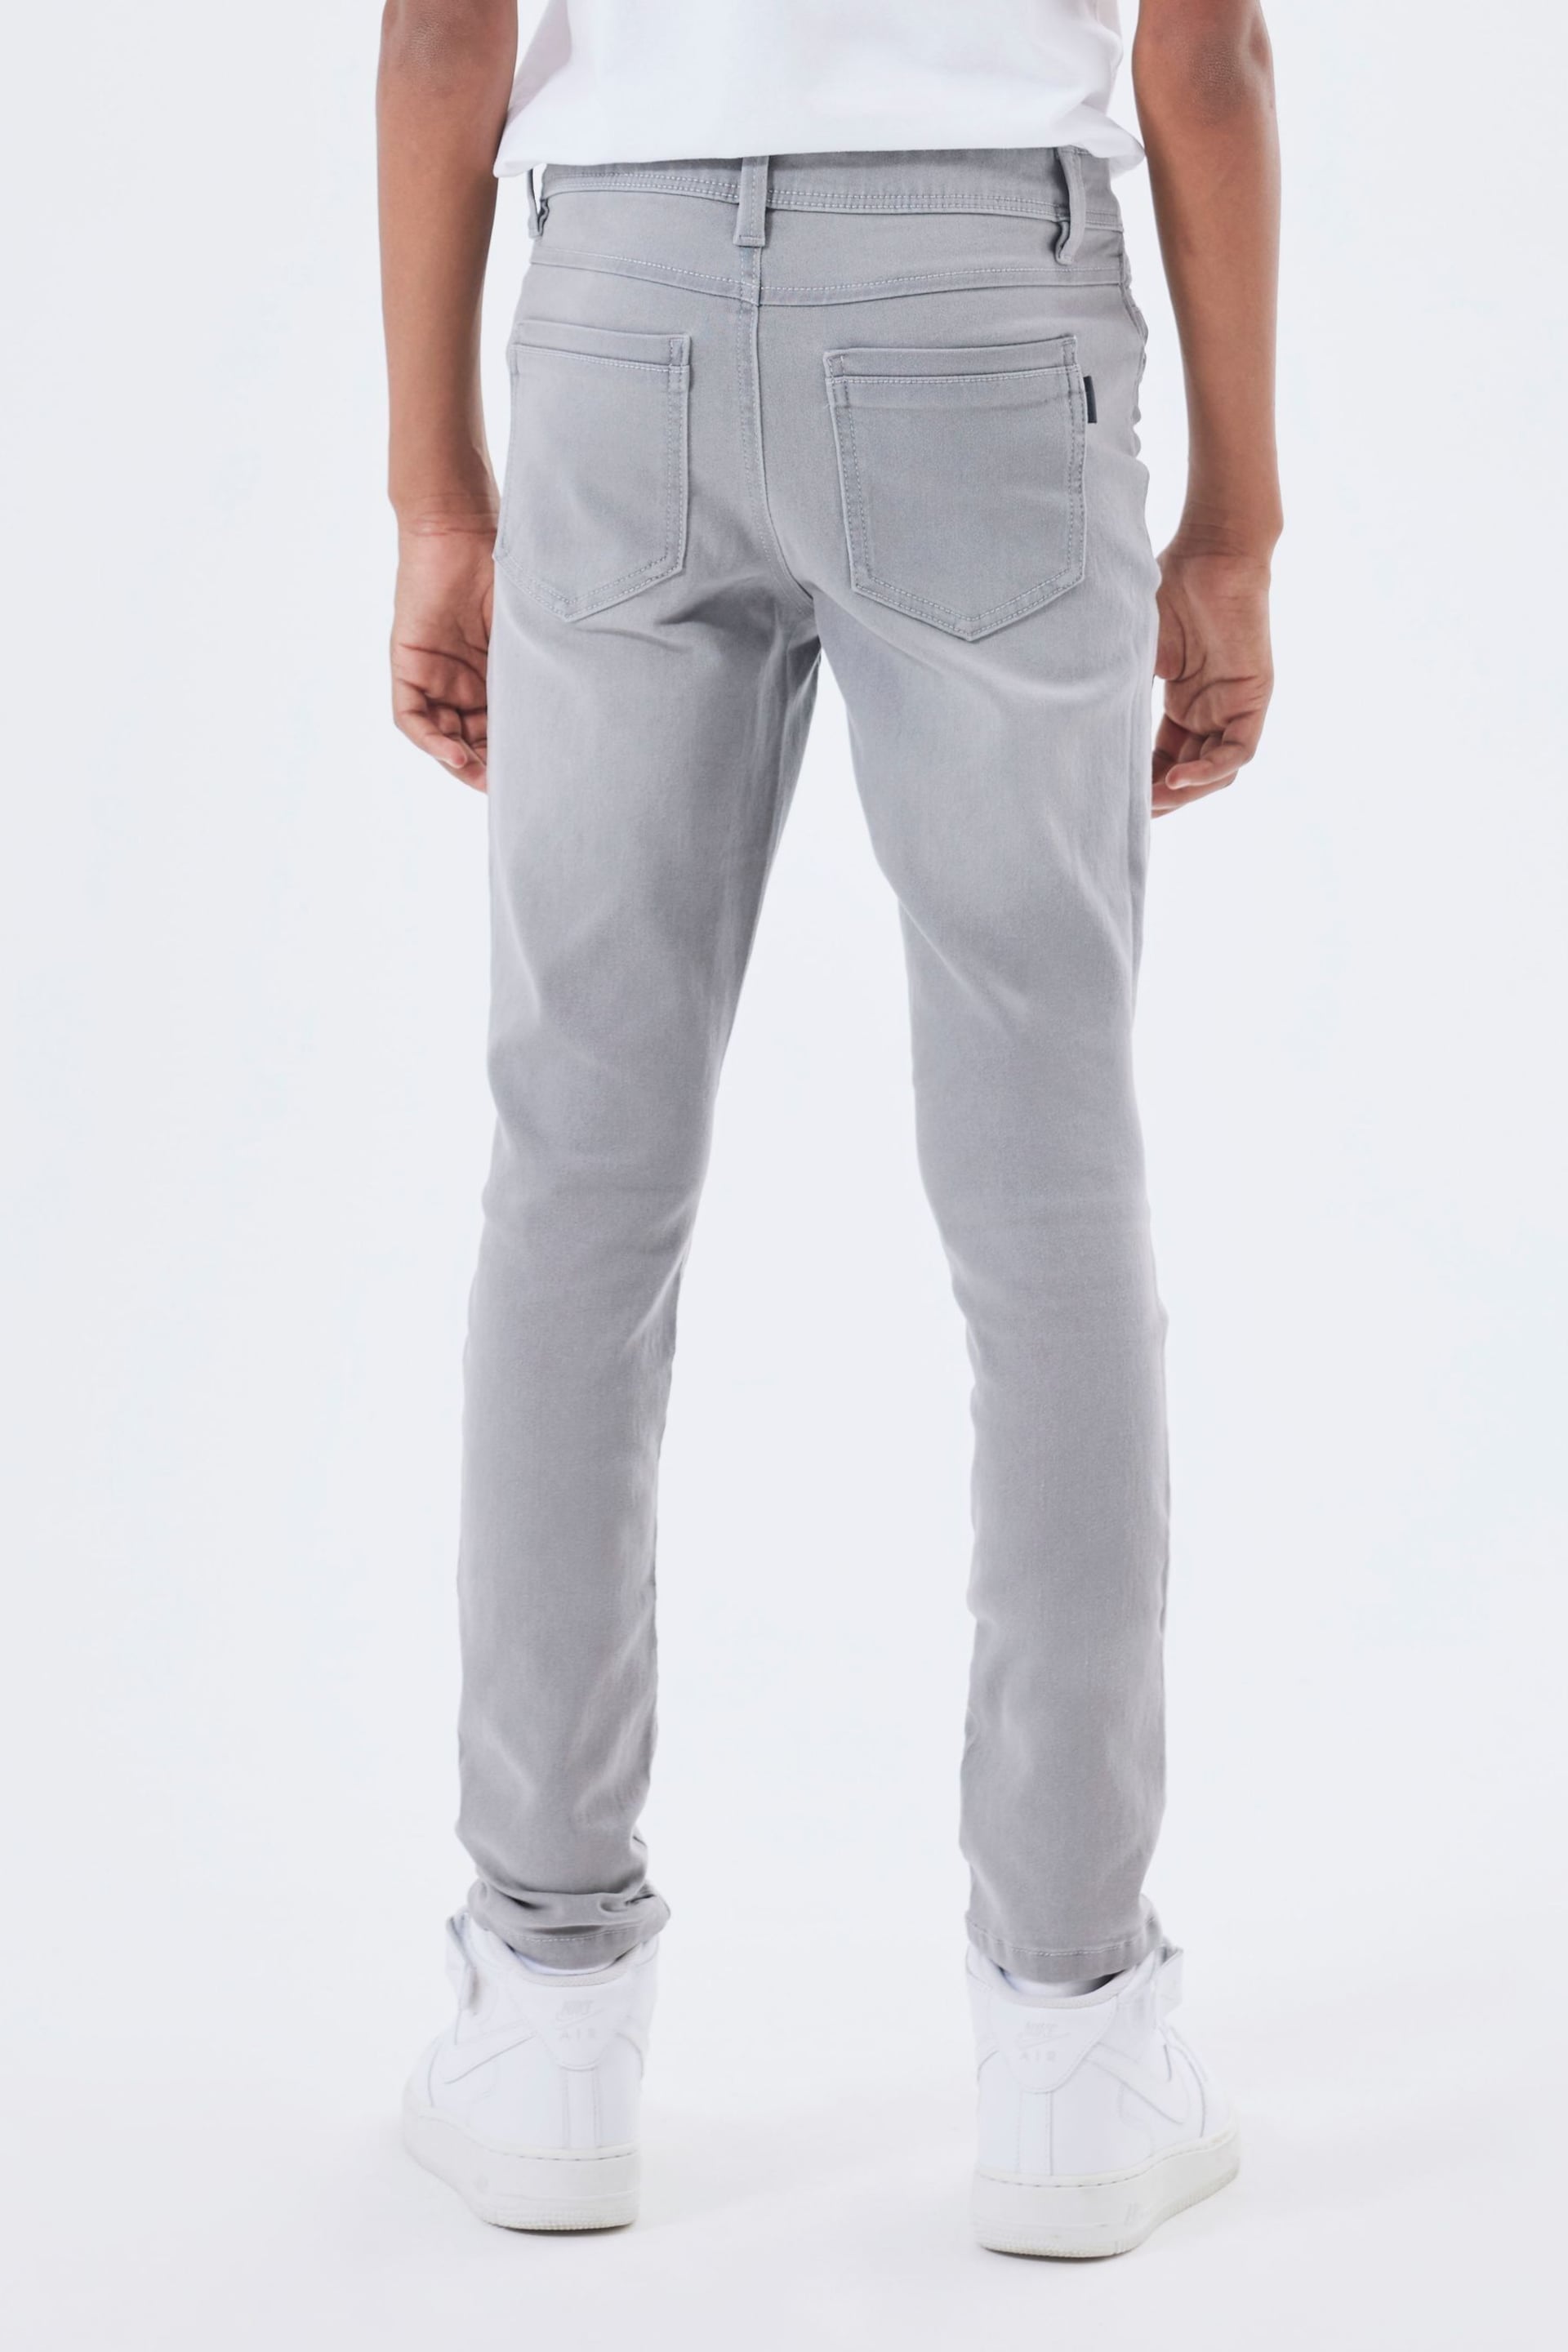 Name It Grey Boys Slim Fit Jeans - Image 2 of 6